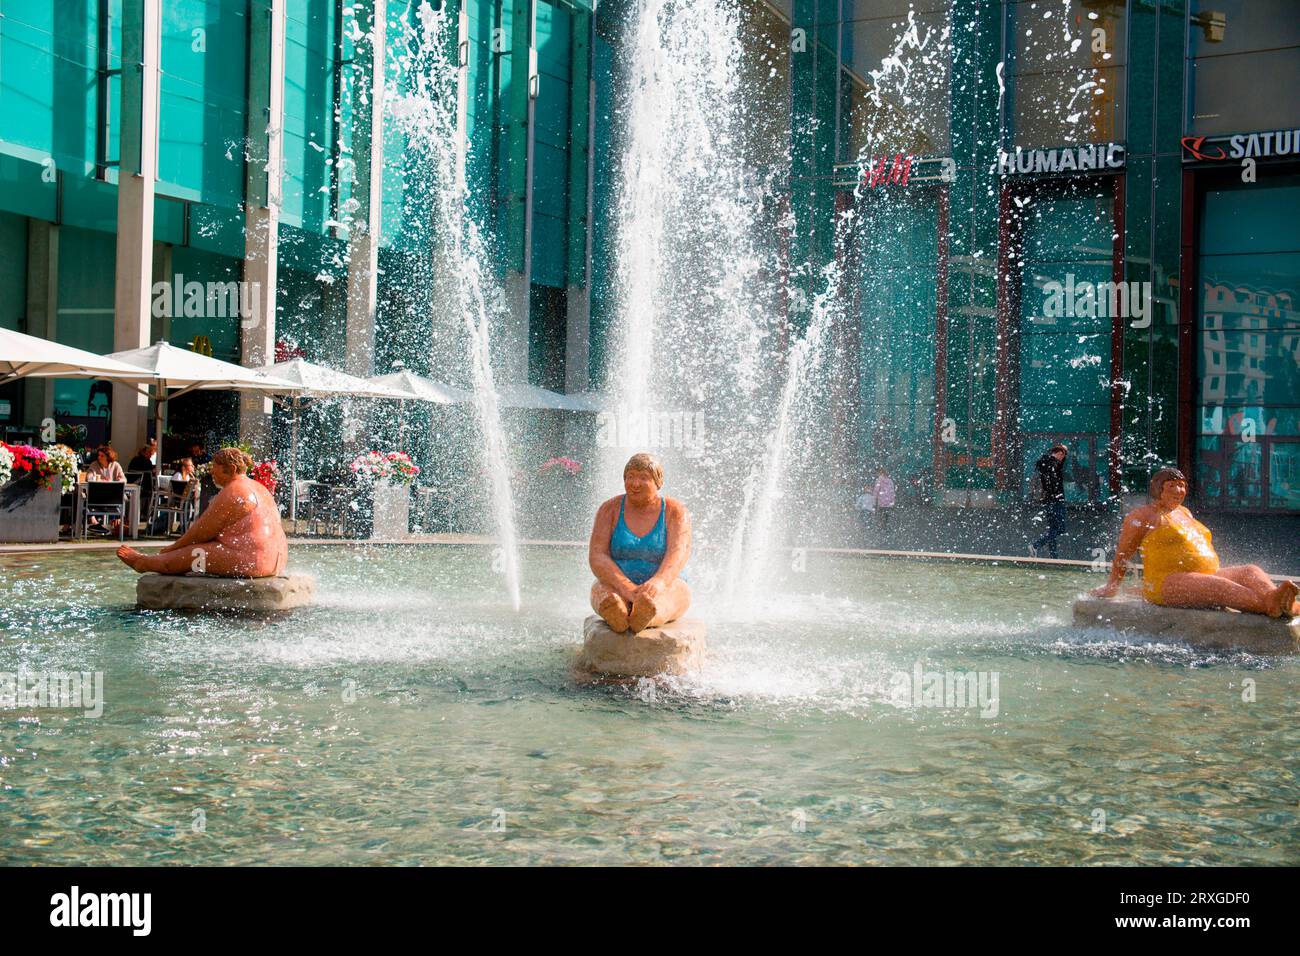 Fountain in which 3 ladies refresh themselves, Braunschweig, Lower Saxony, Germany Stock Photo